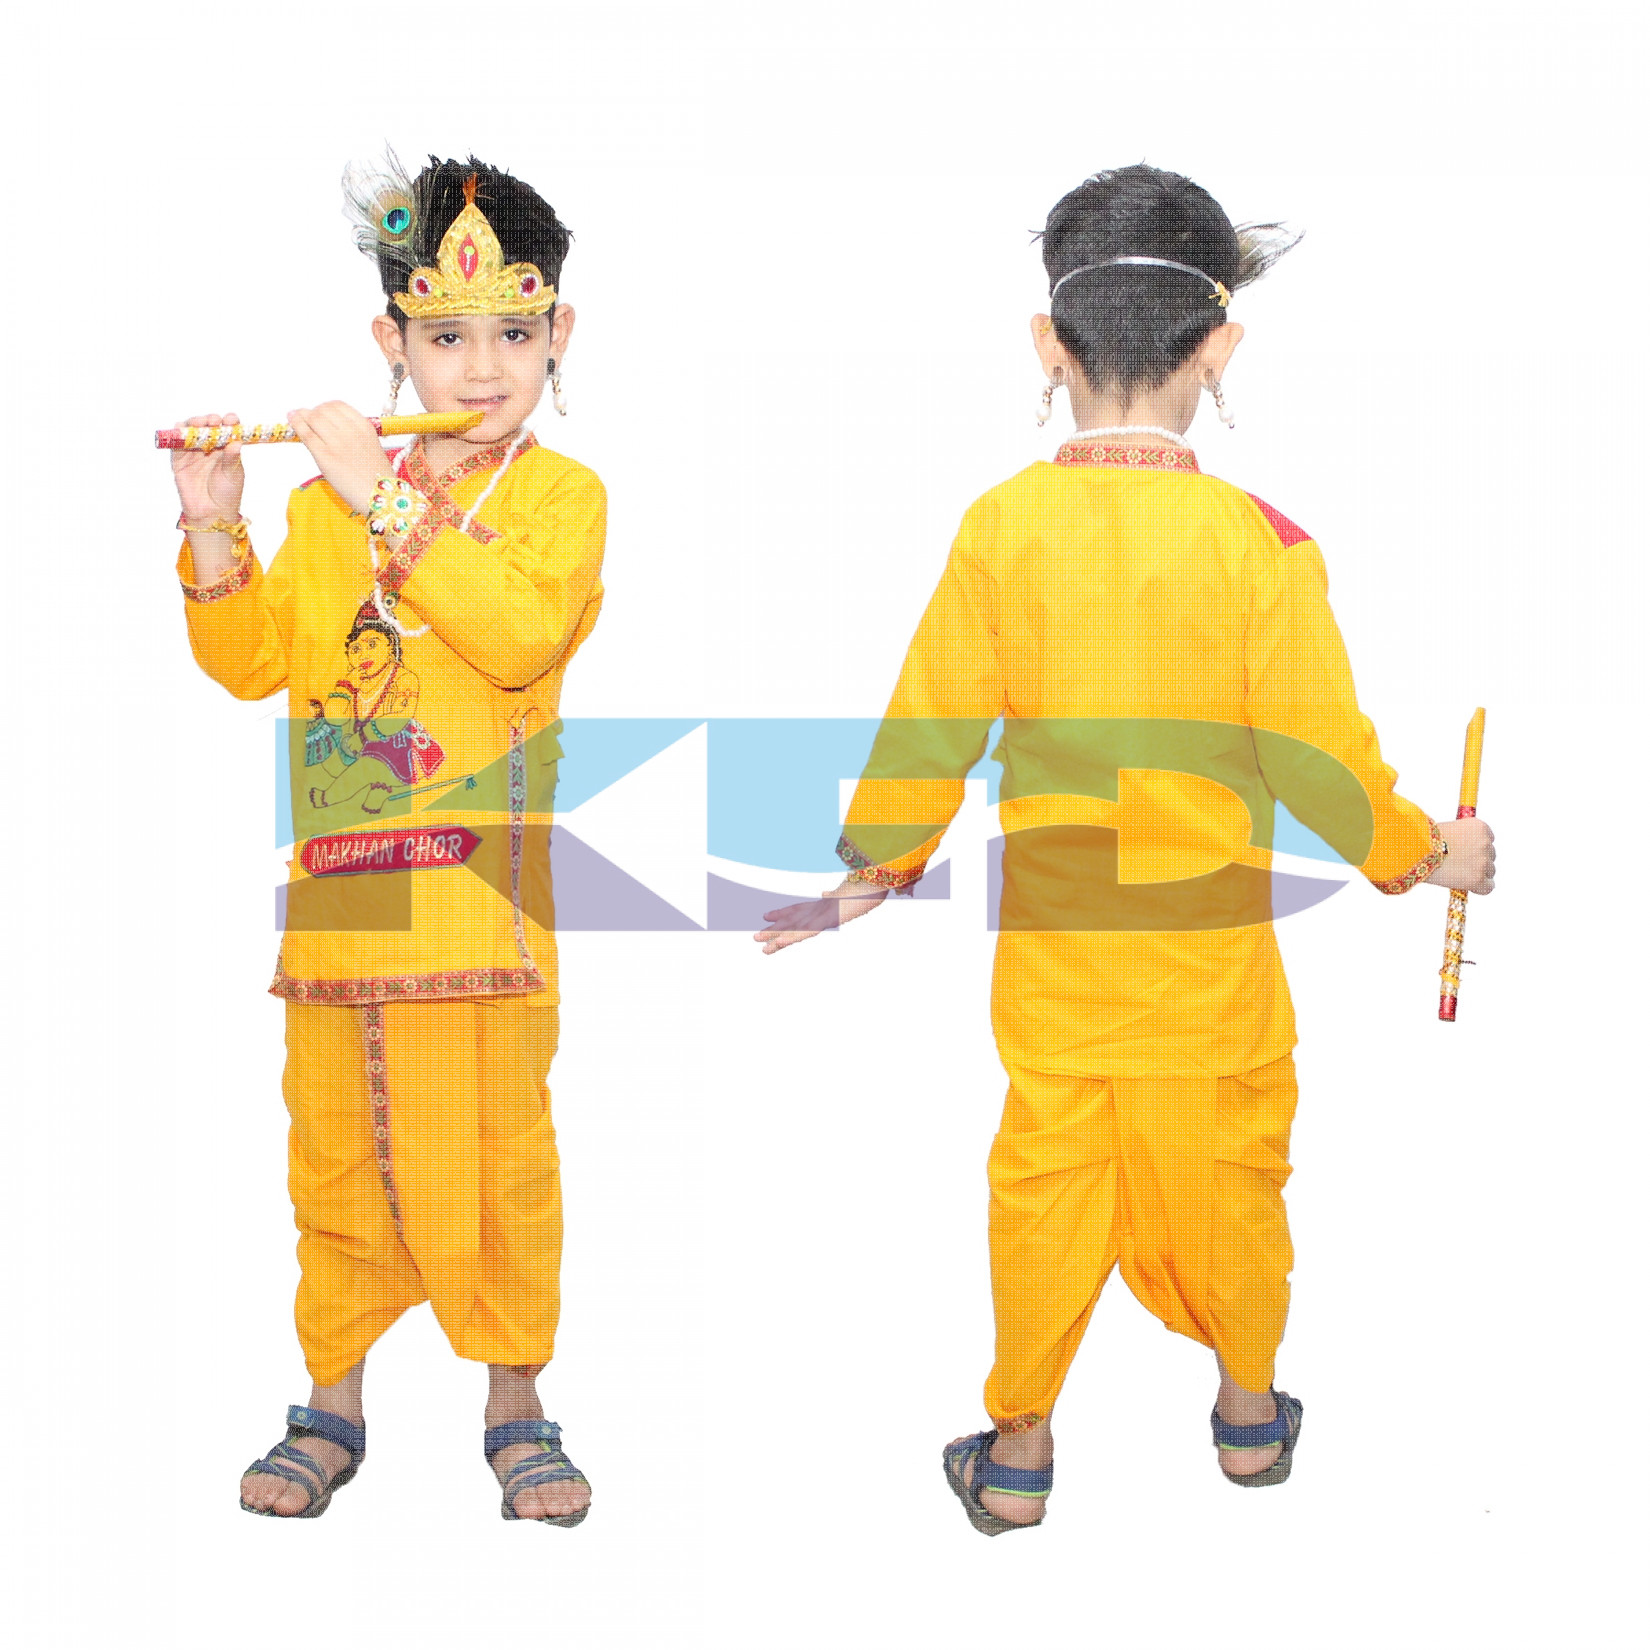 Maakhan Chor In Cotton Fabric,Krishnaleela/Janmashtami/Kanha/Mythological Character For Kids School Annual functionTtheme Party/Competition/Stage Shows Dress